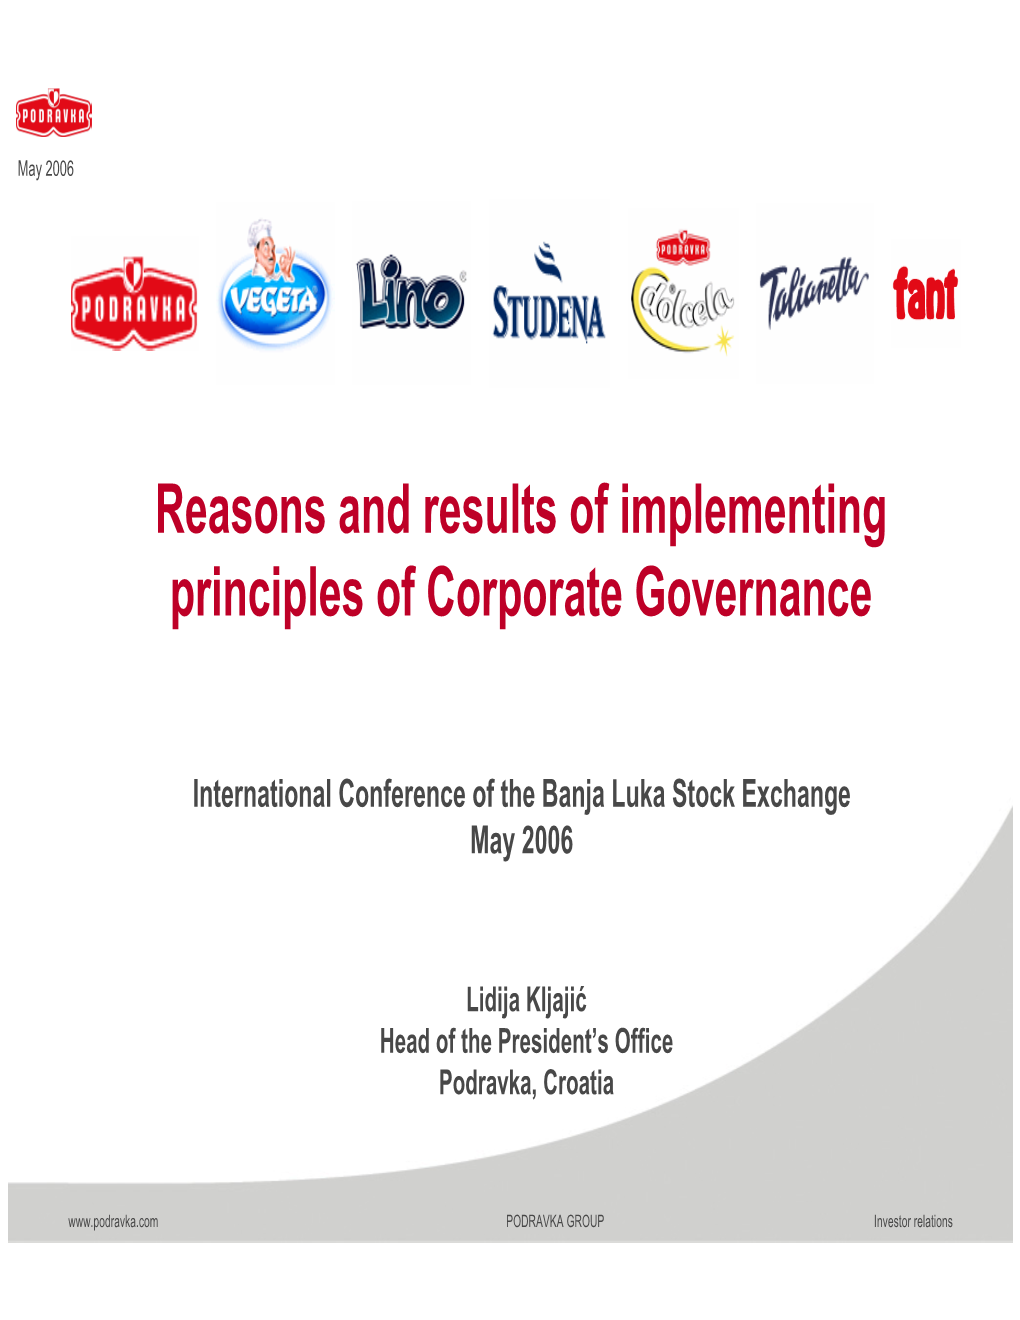 Reasons and Results of Implementing Principles of Corporate Governance